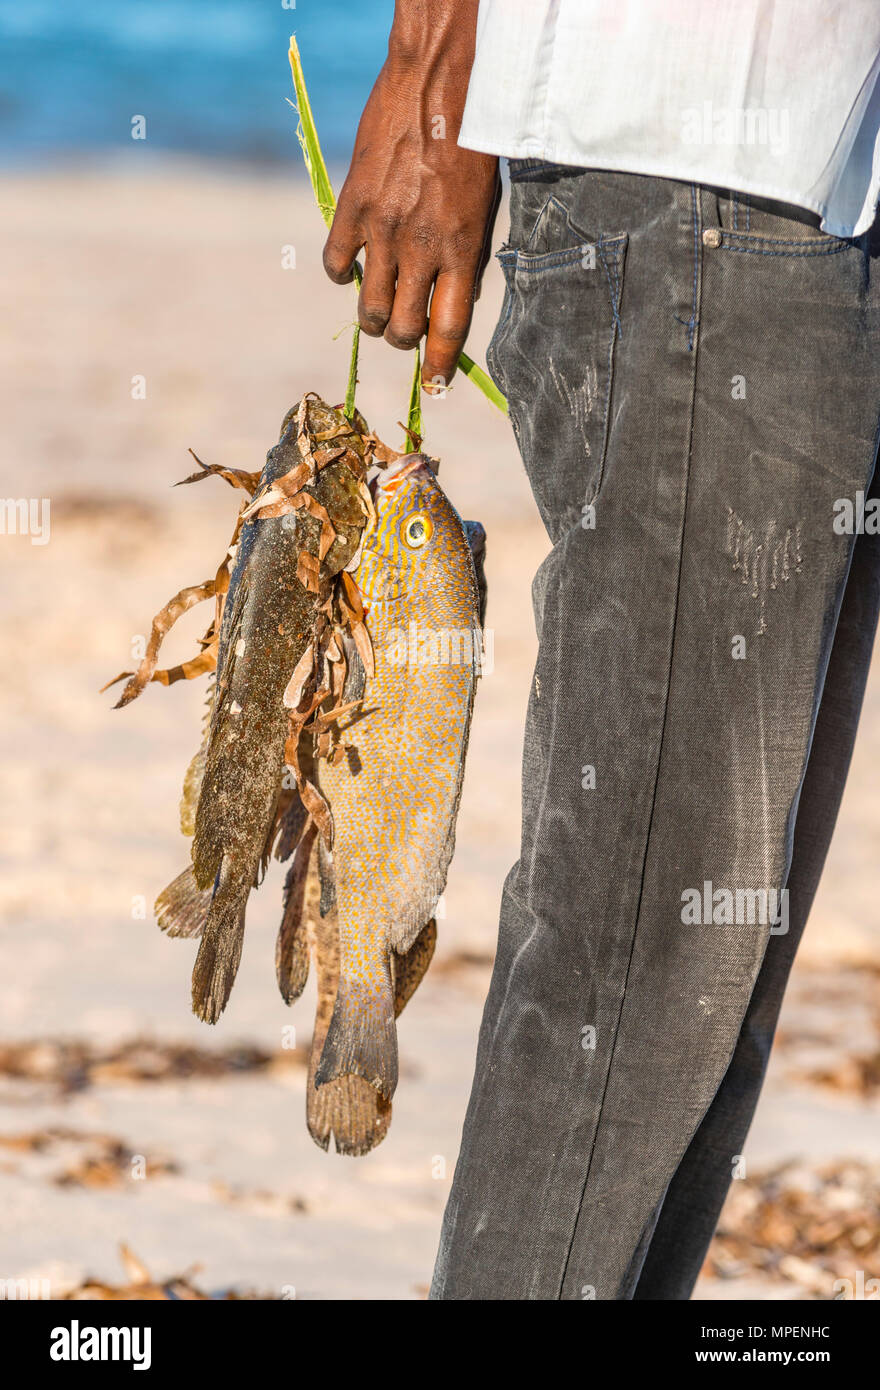 A .local fisherman holds some freshy caught fish in Mozambique. Stock Photo